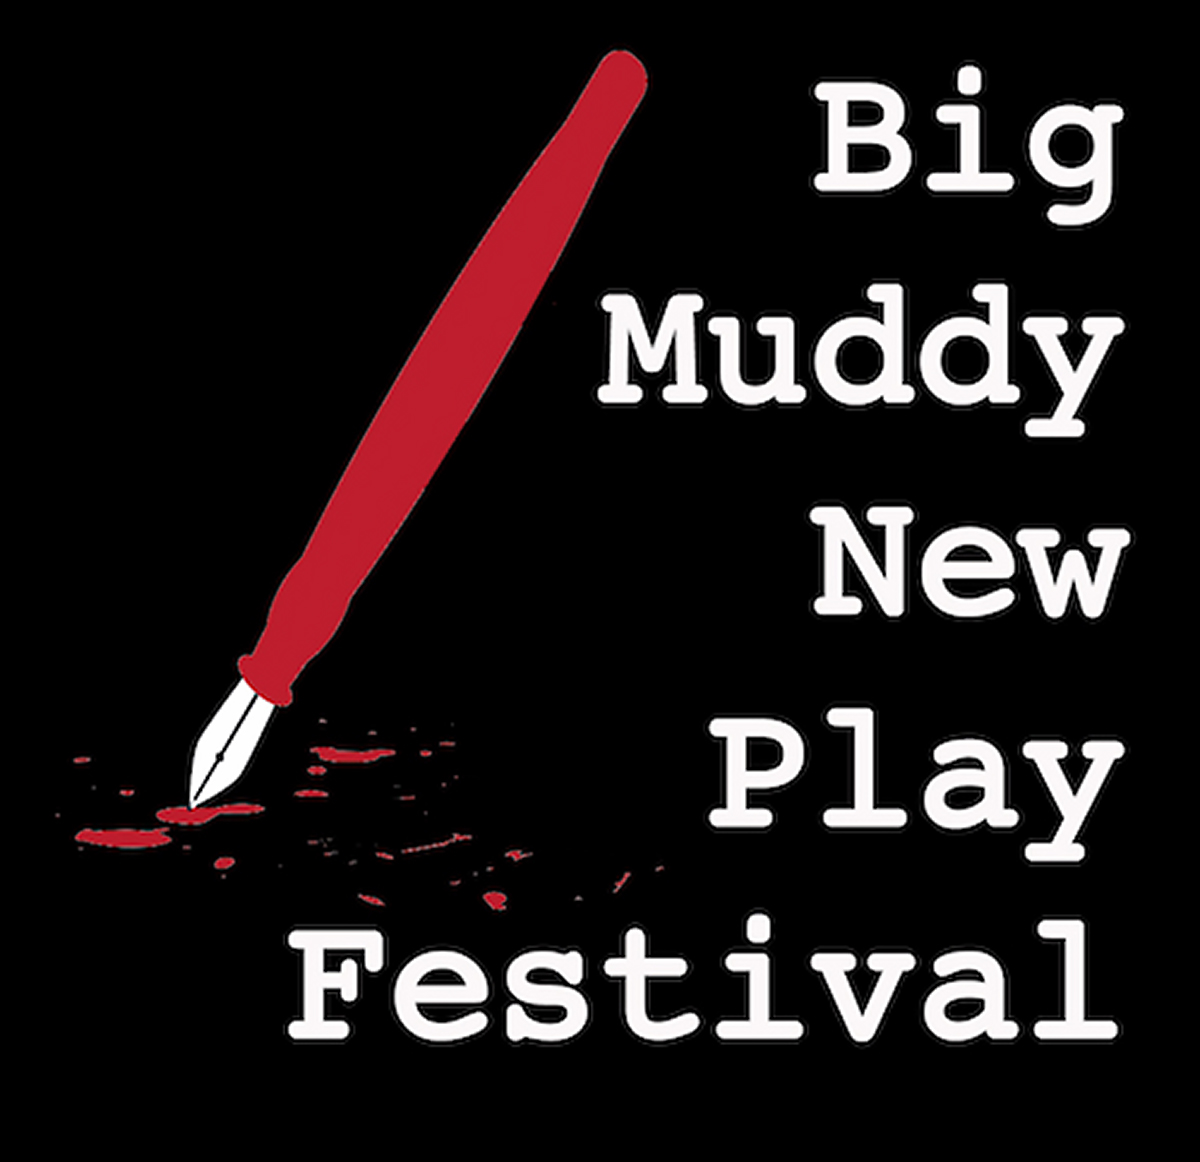 Image of Big Muddy Play Festival poster.